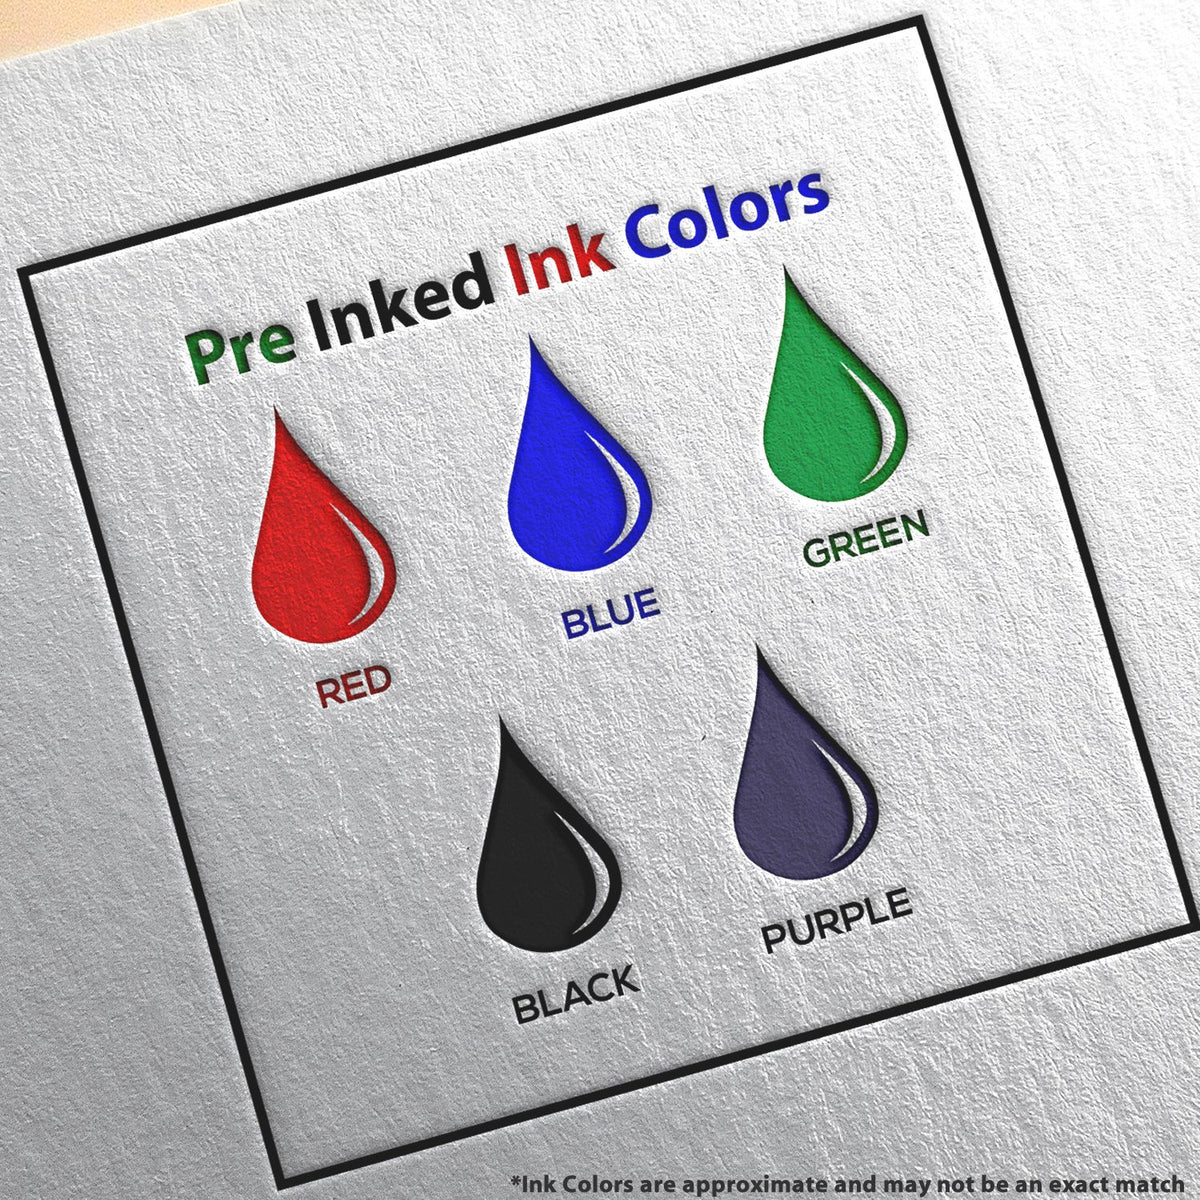 A picture showing the different ink colors or hues available for the Premium MaxLight Pre-Inked Tennessee Engineering Stamp product.